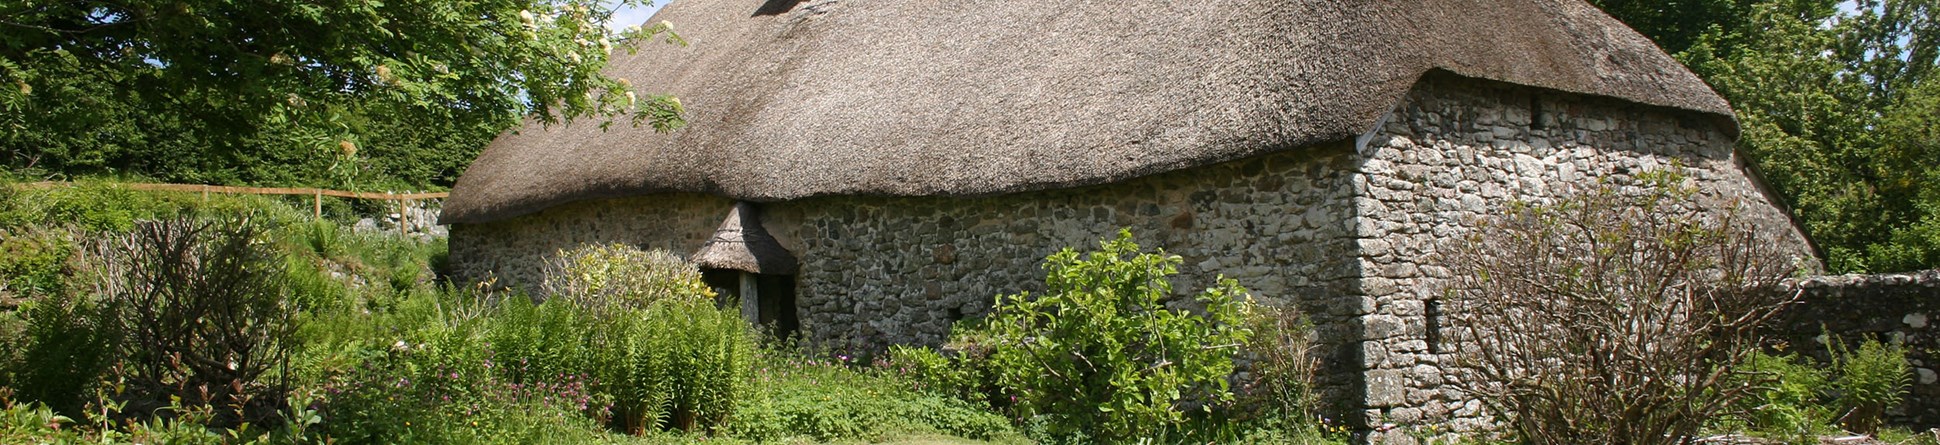 Traditional stone longhouse with thatched roof.